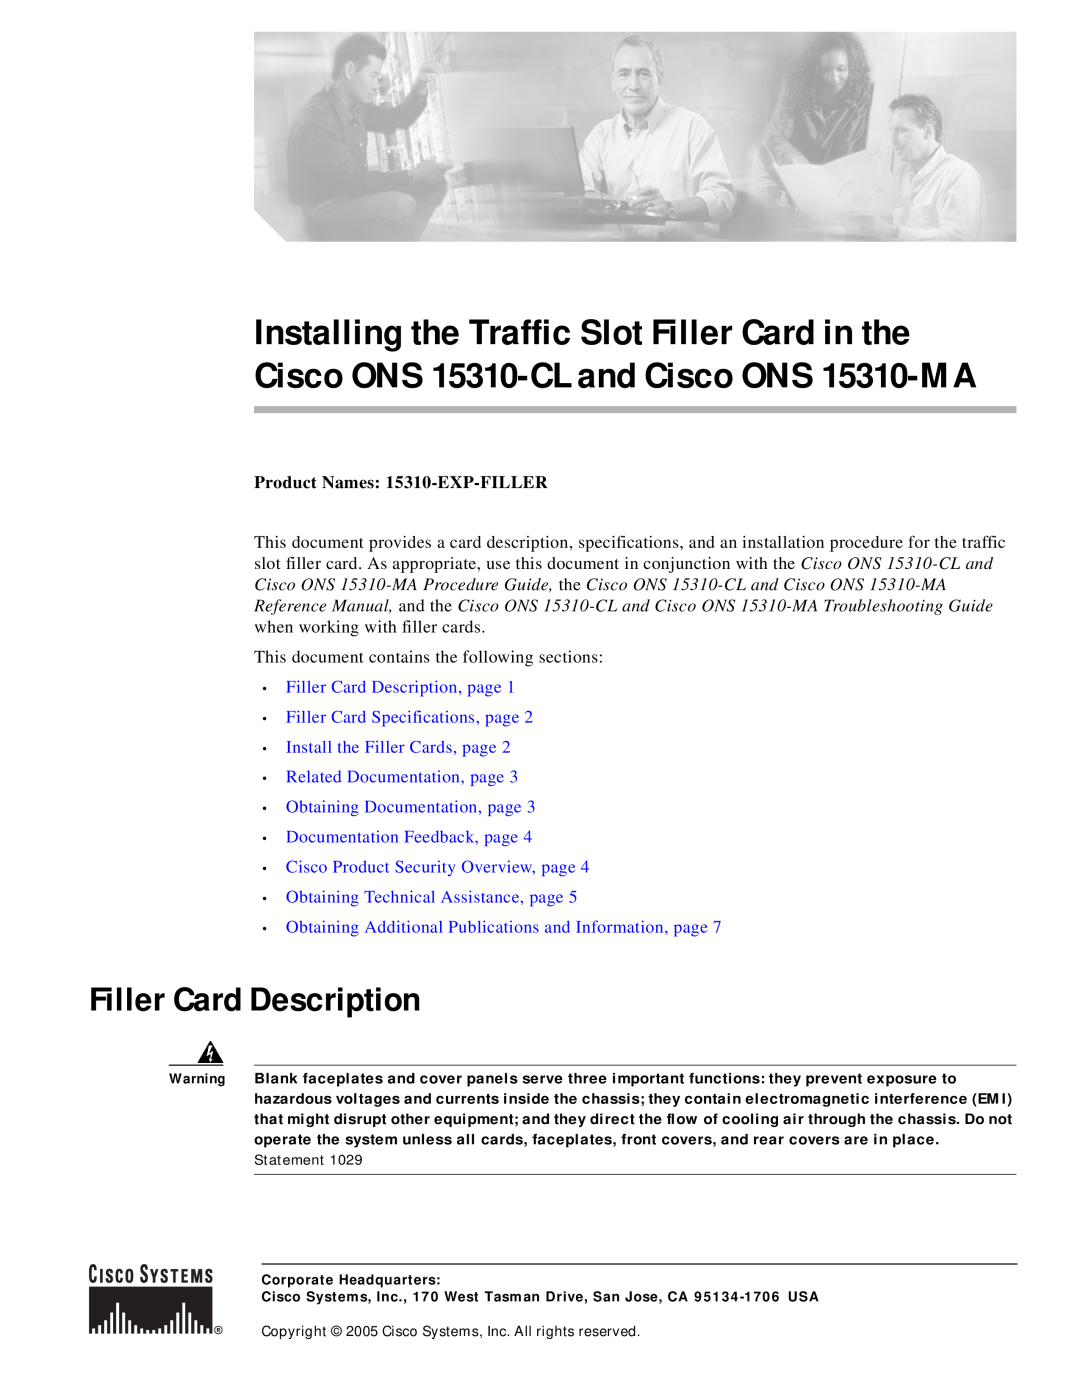 Cisco Systems 15310-CL, 15310-MA specifications Filler Card Description, Product Names 15310-EXP-FILLER 